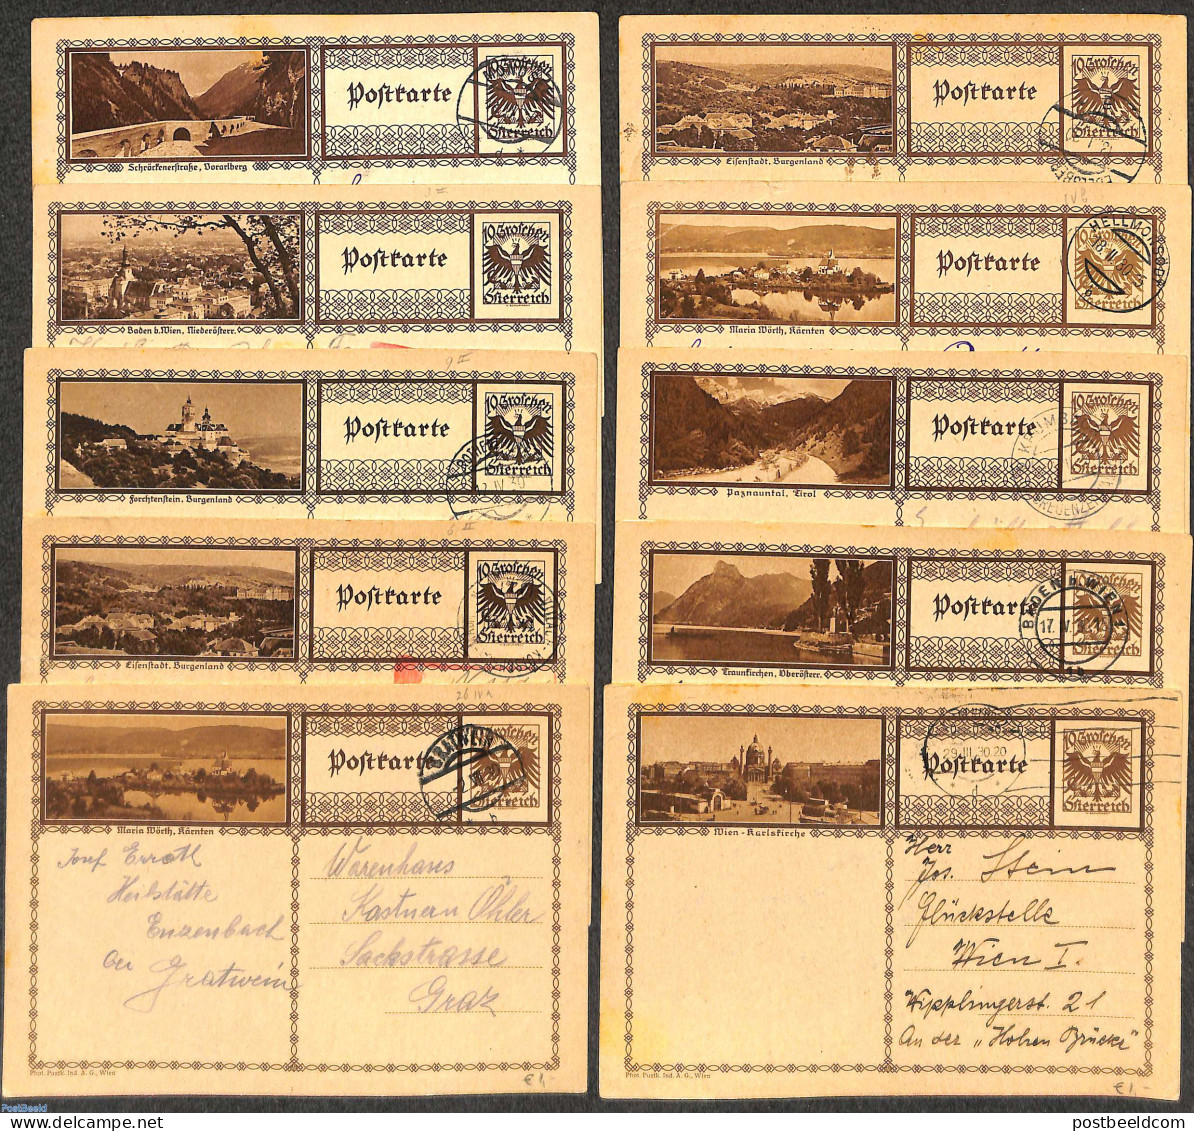 Austria 1930 Lot With 10 Used Illustrated Postcards, Used Postal Stationary - Covers & Documents